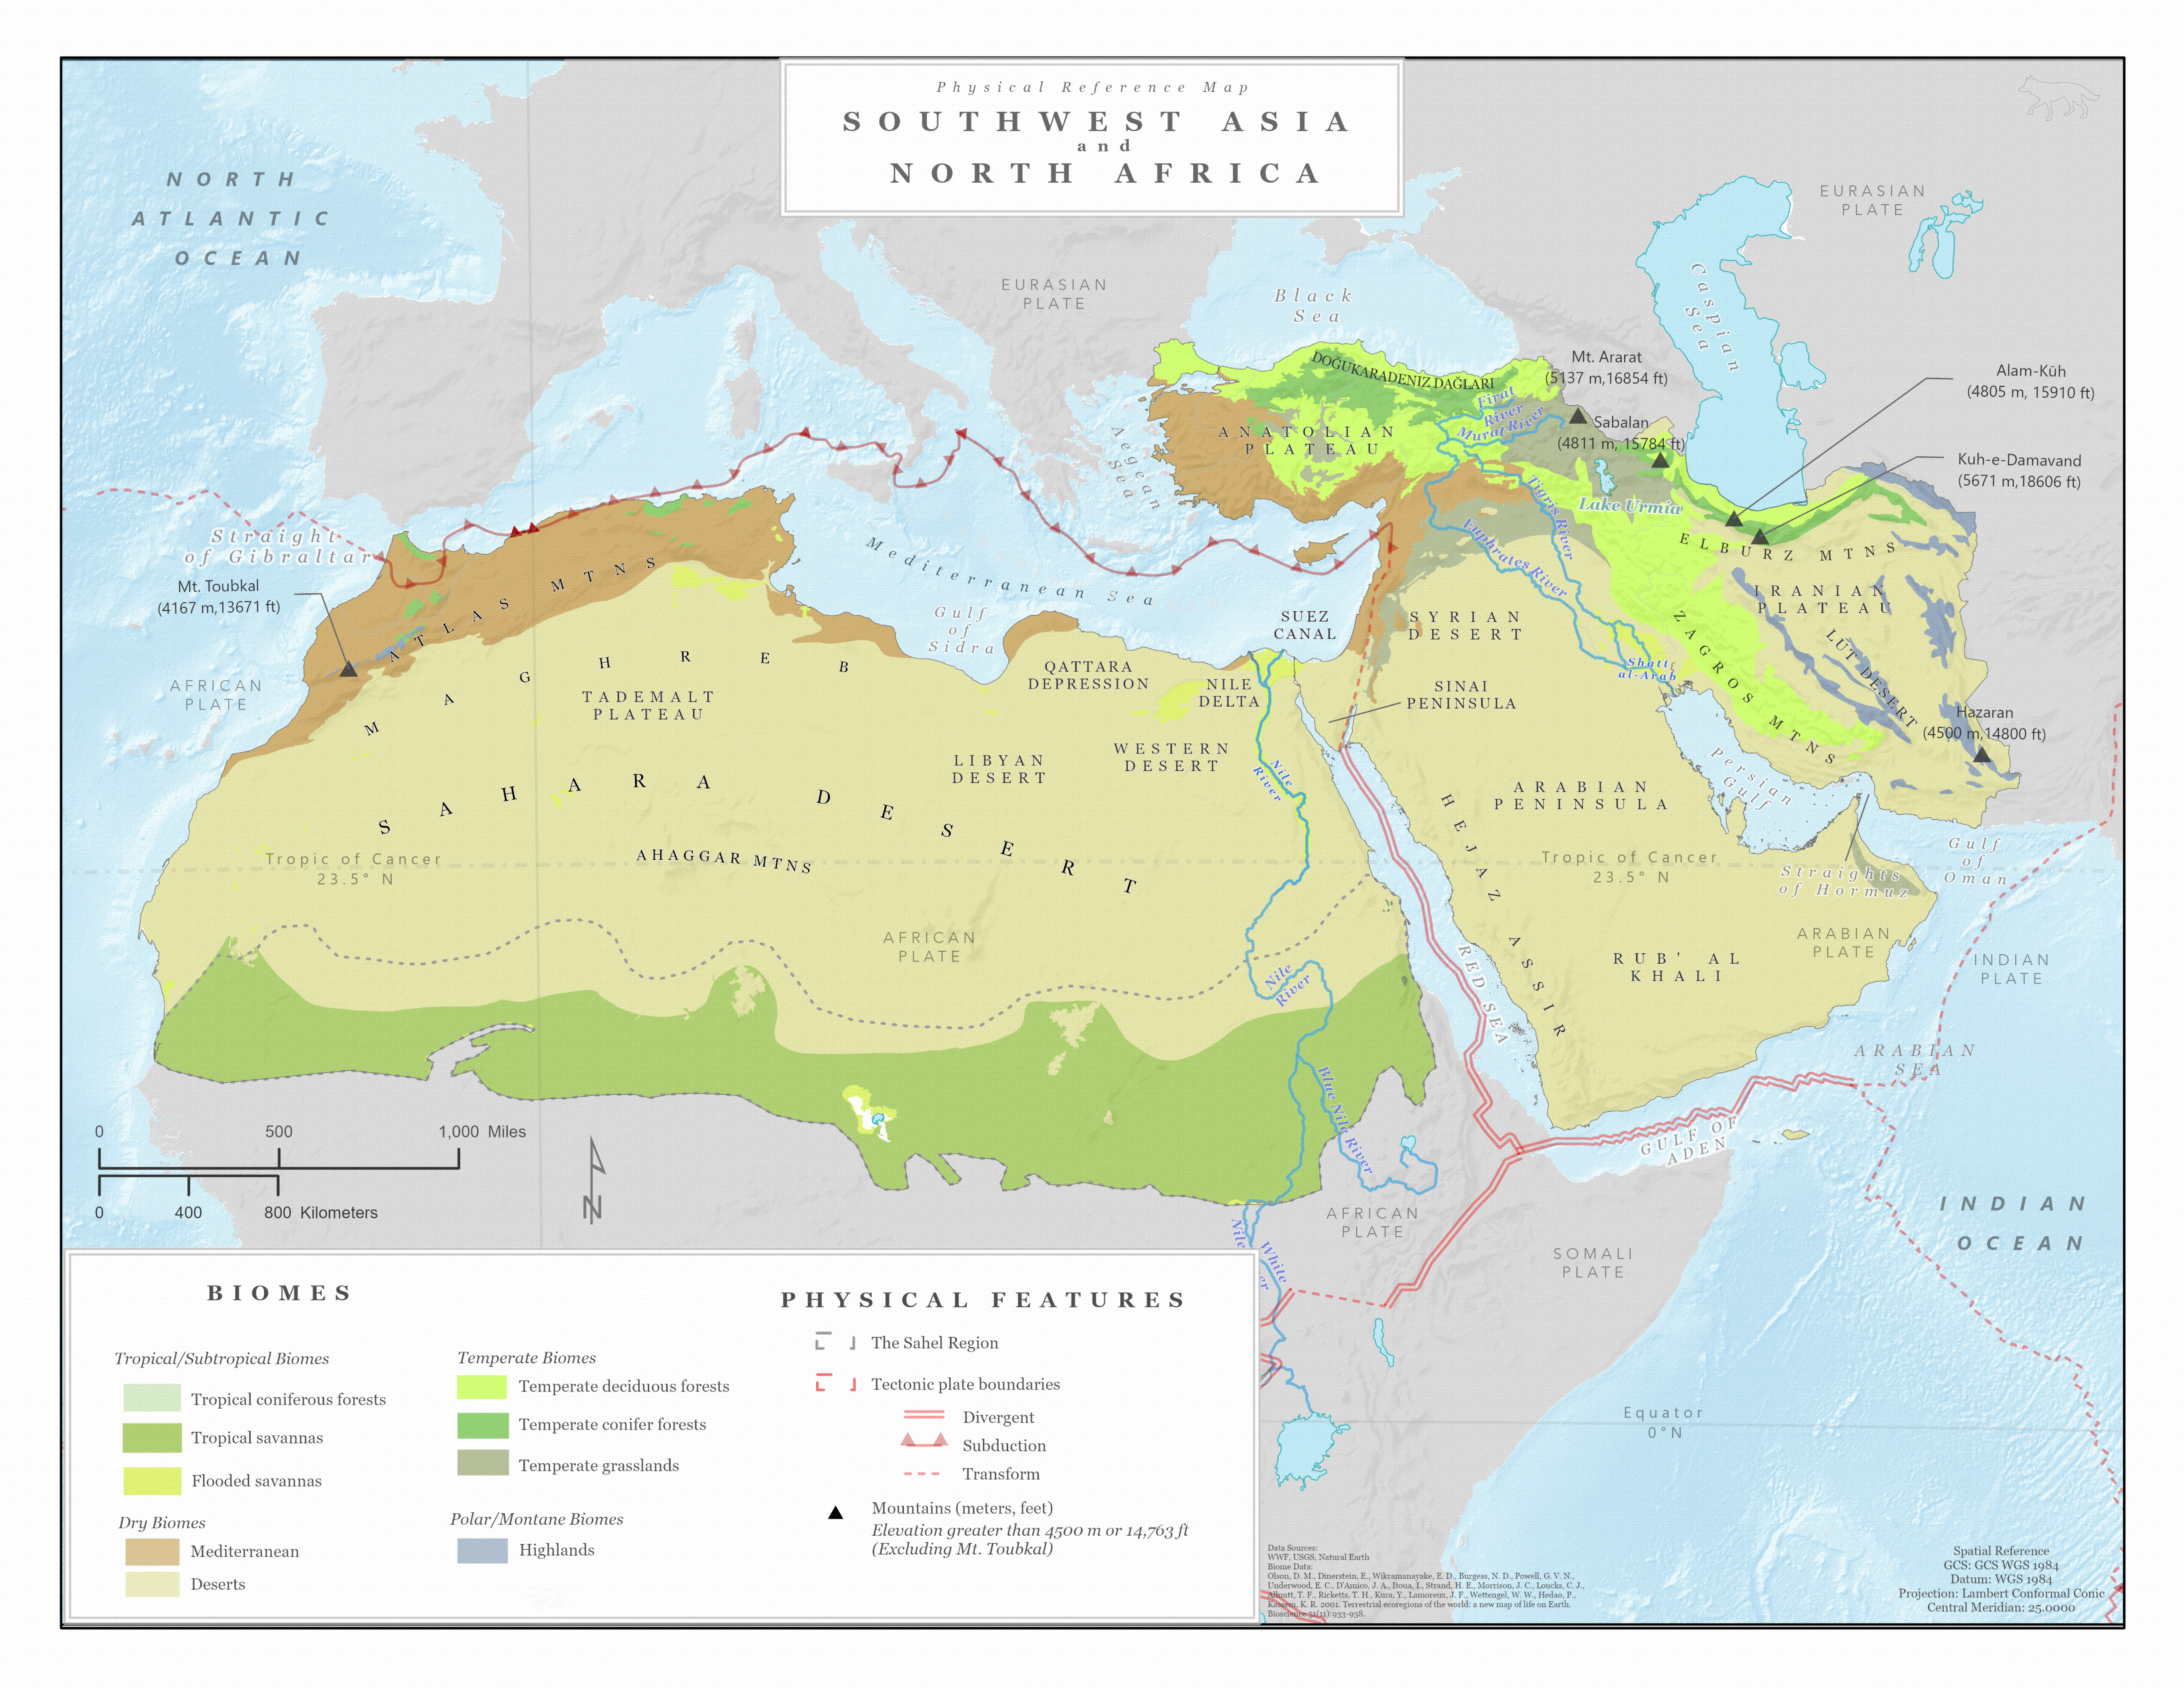 Biome and physical features map of Southwest Asia and North Africa